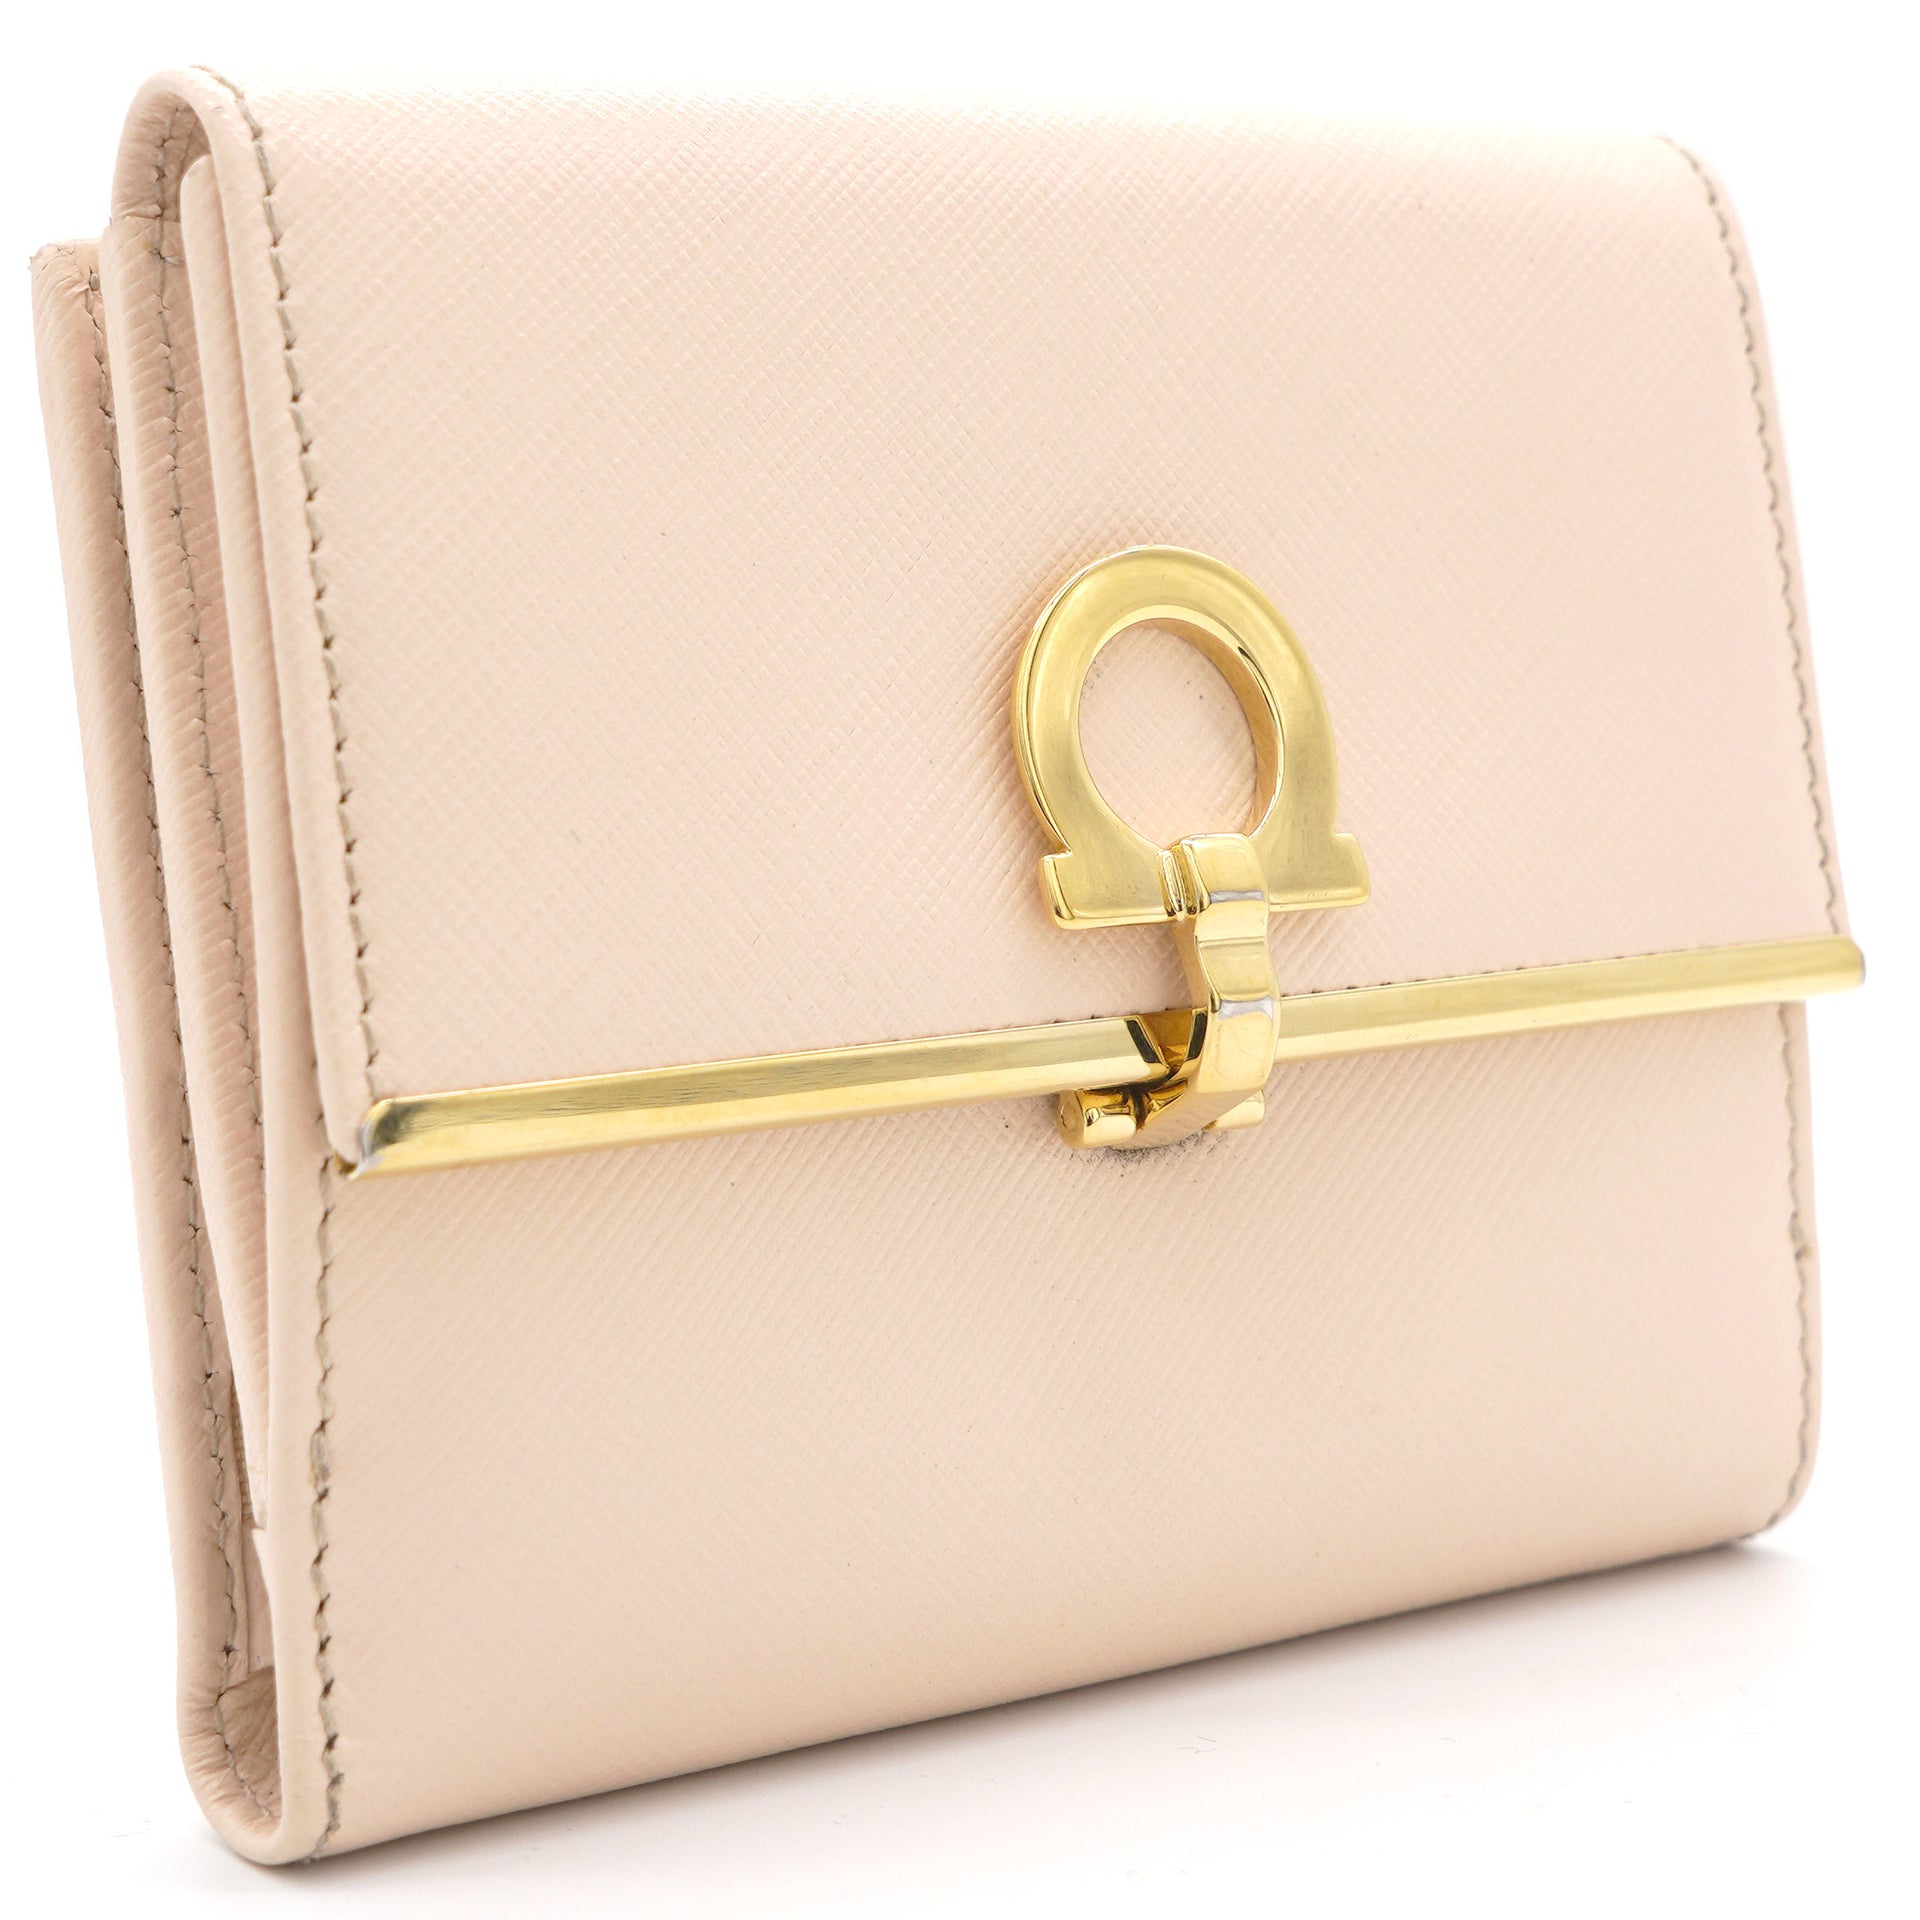 Beige Leather Gancini Clip Compact Wallet